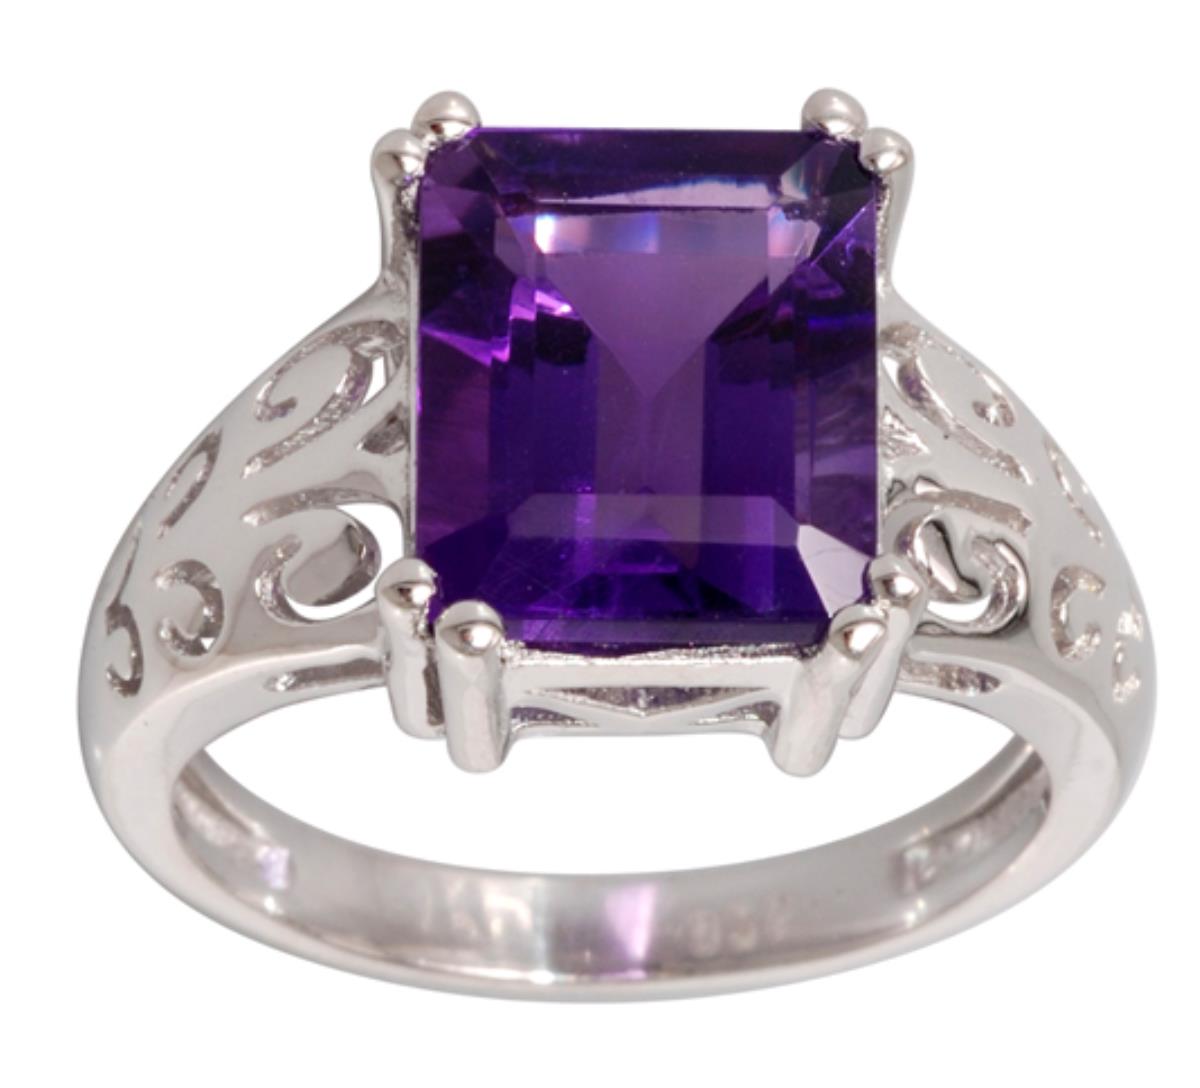 10K White Gold 11x9mm Emerald Cut Amethyst Filigree Sides Solitaire Ring